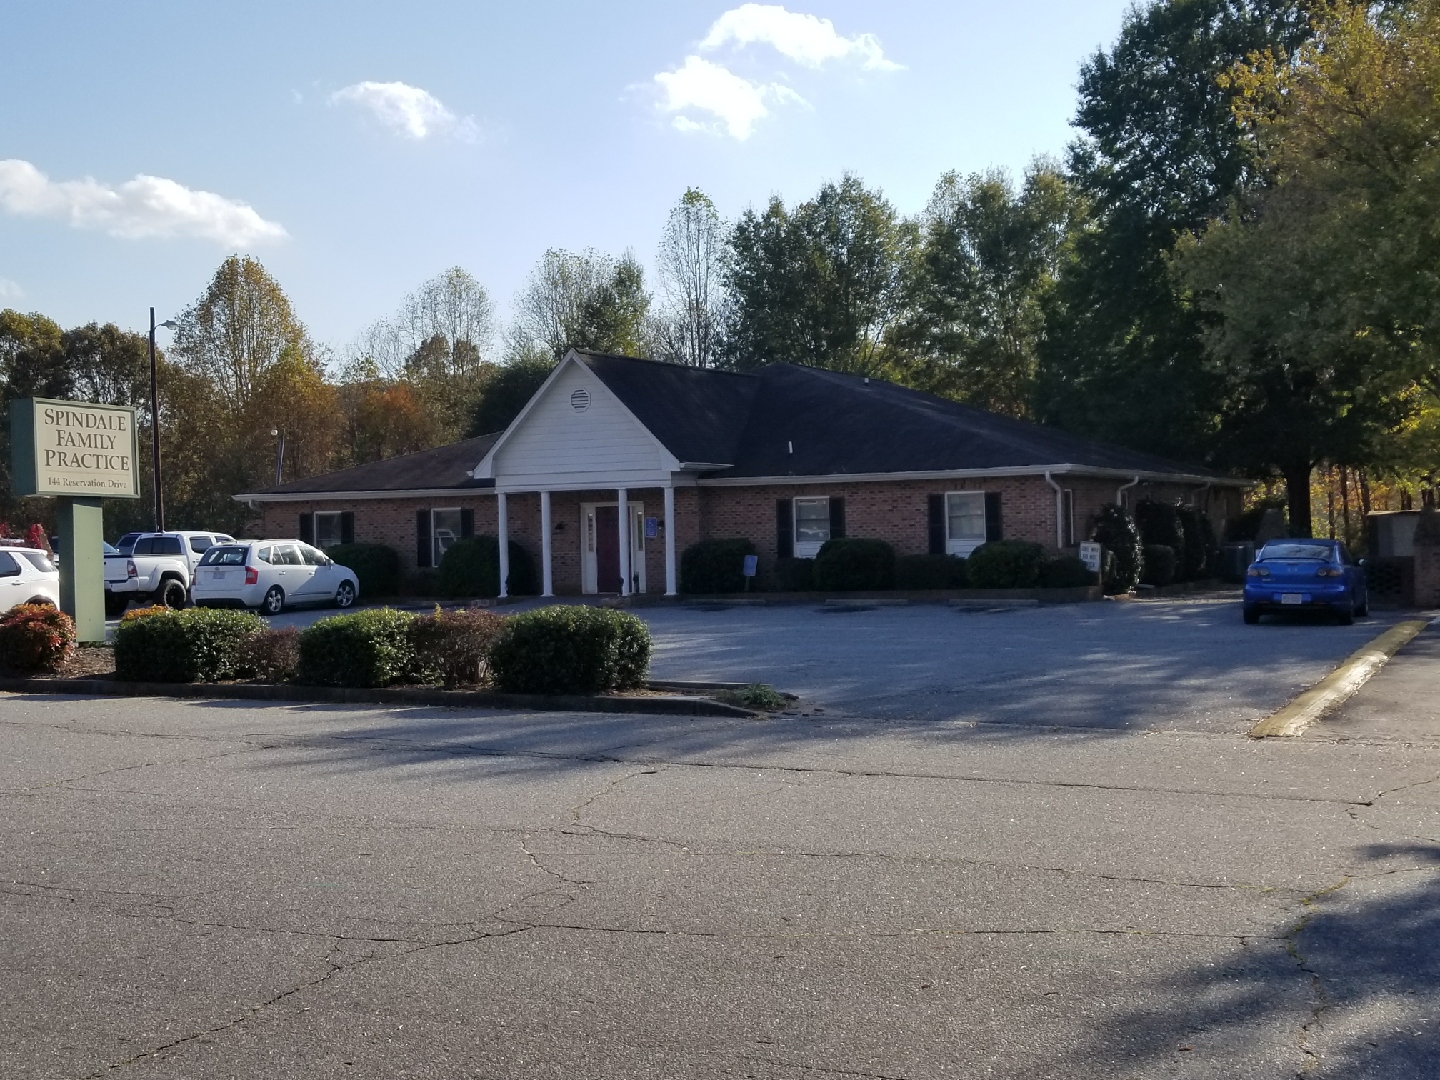 Spindale Family Practice clinic